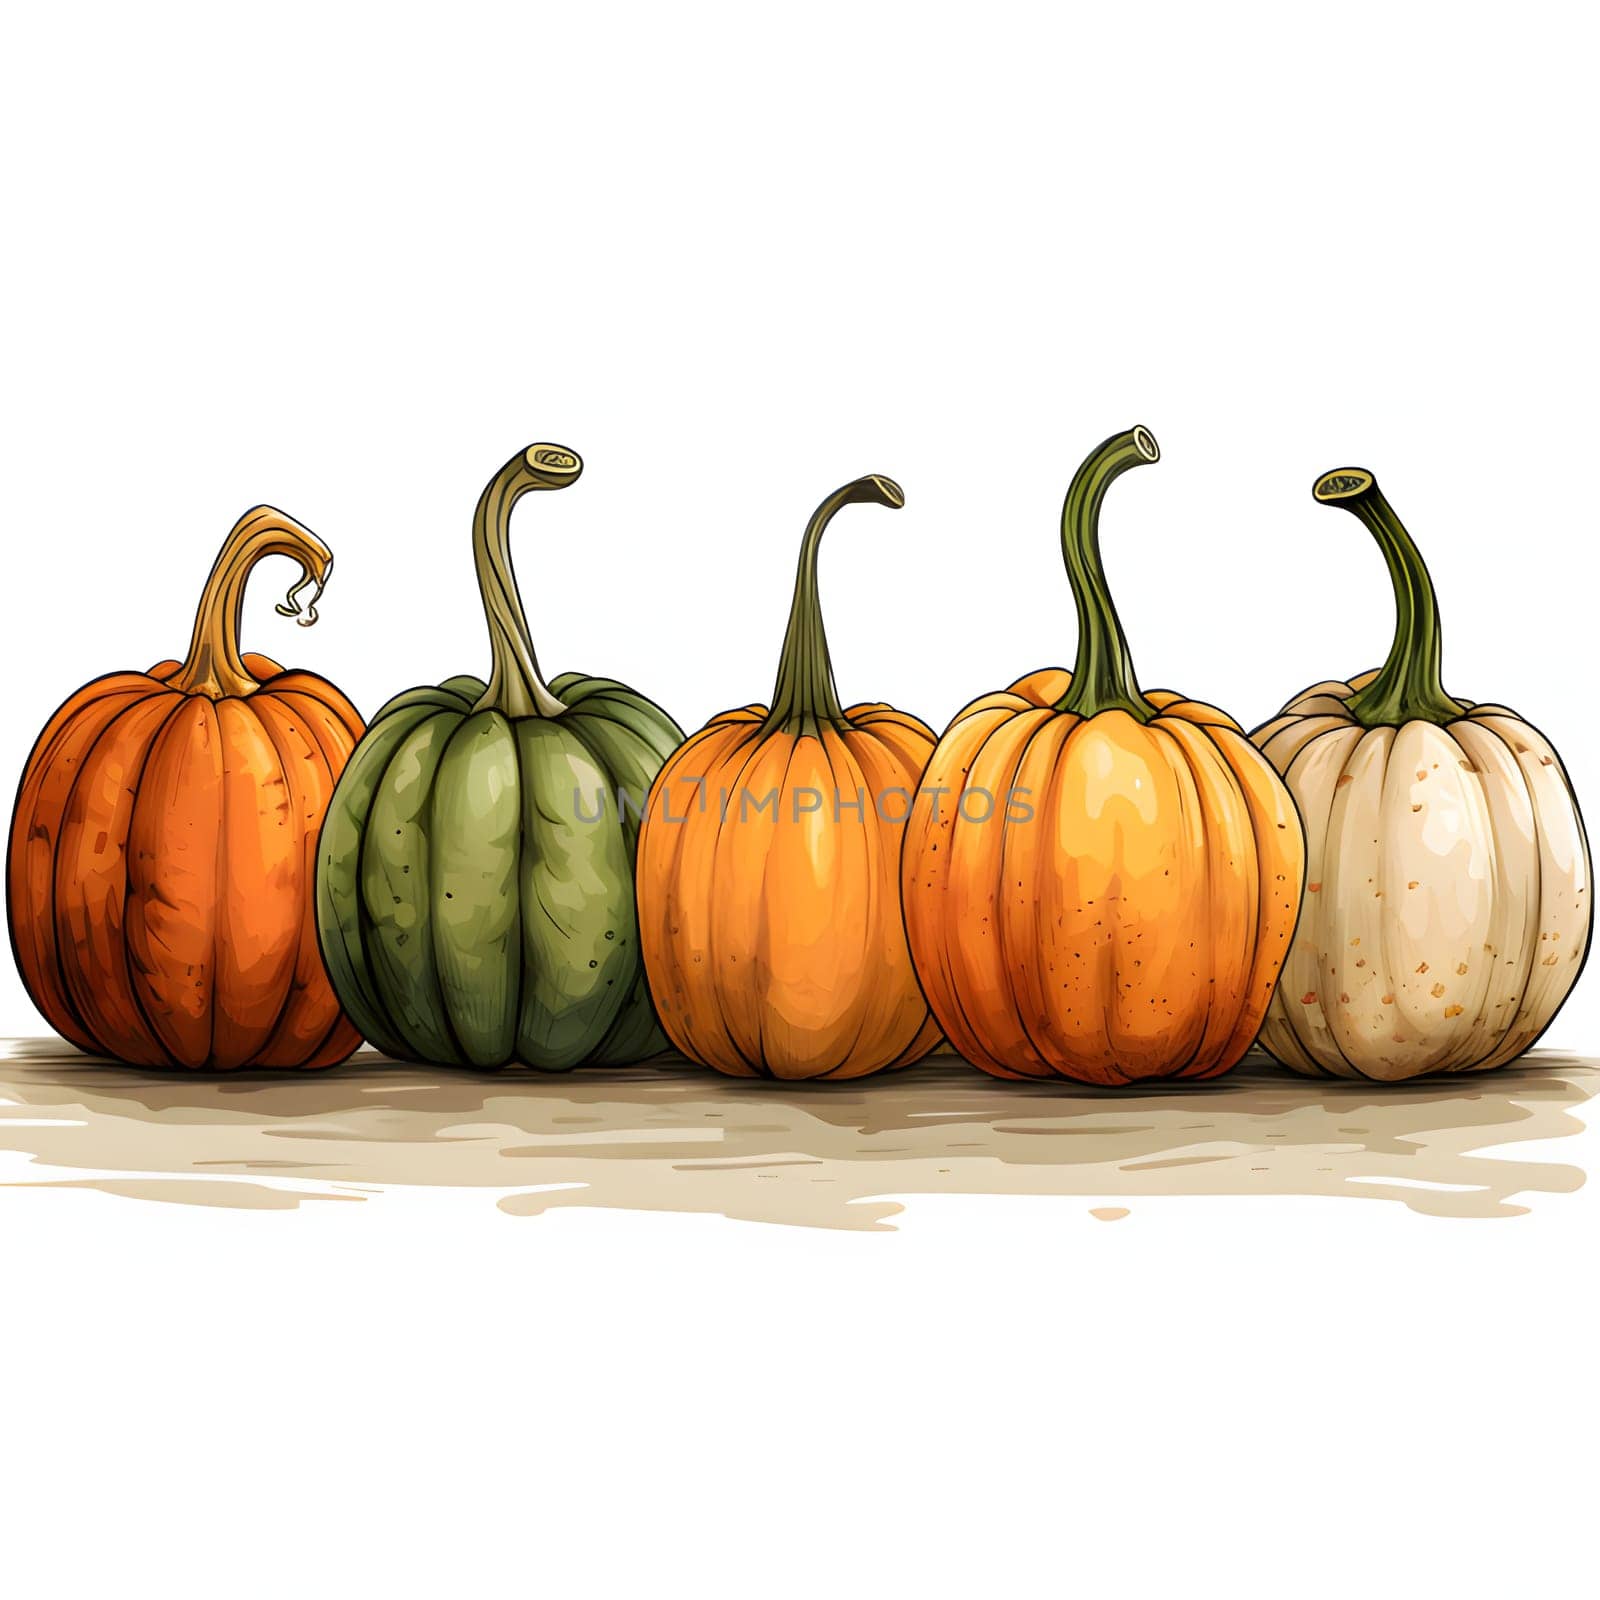 Illustration of five pumpkins arranged in a row. Pumpkin as a dish of thanksgiving for the harvest, picture on a white isolated background. by ThemesS